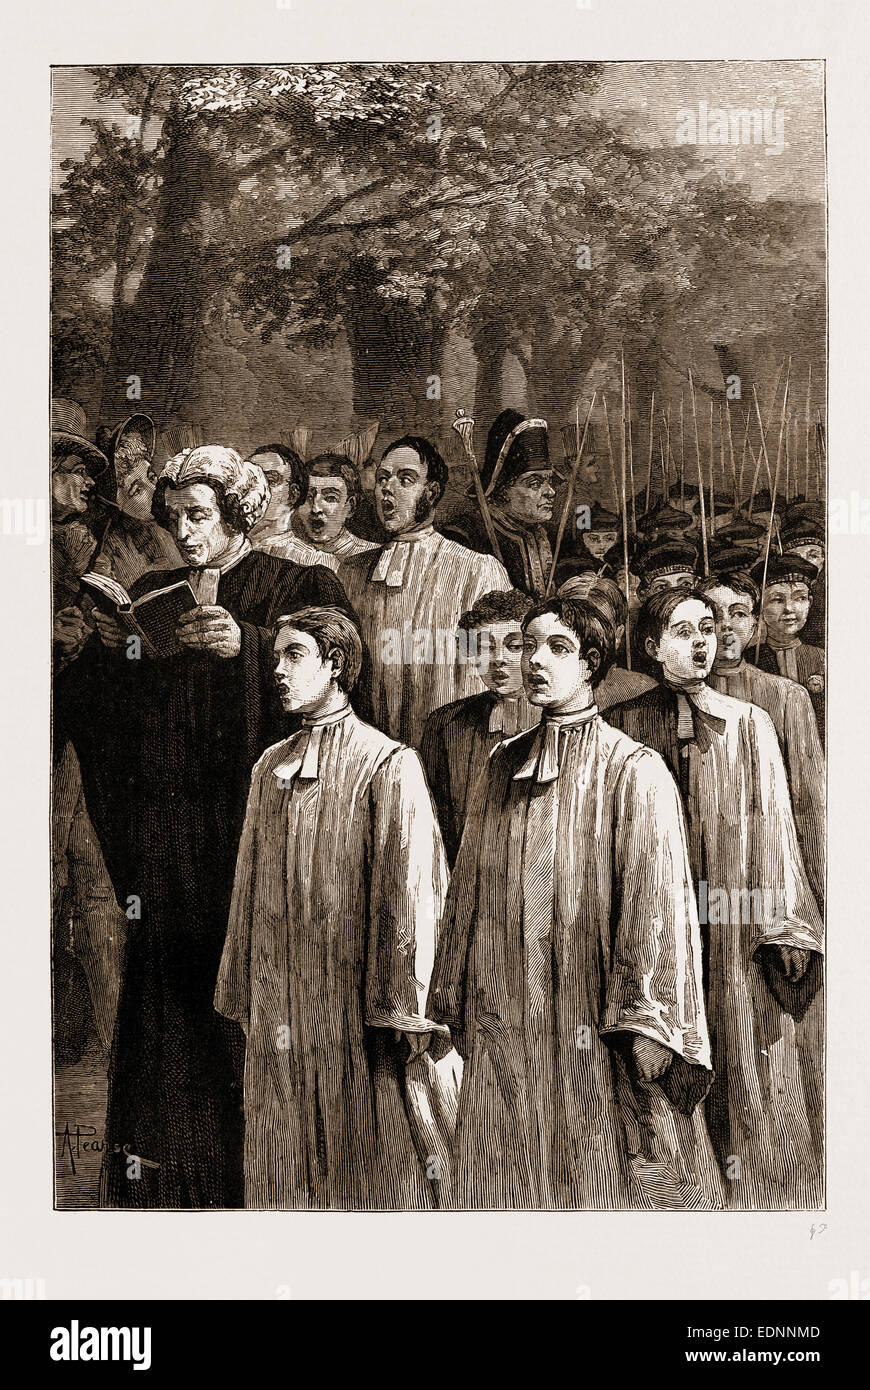 ROGATION DAY IN THE OLDEN TIMES: BEATING THE BOUNDS, 1881 Stock Photo